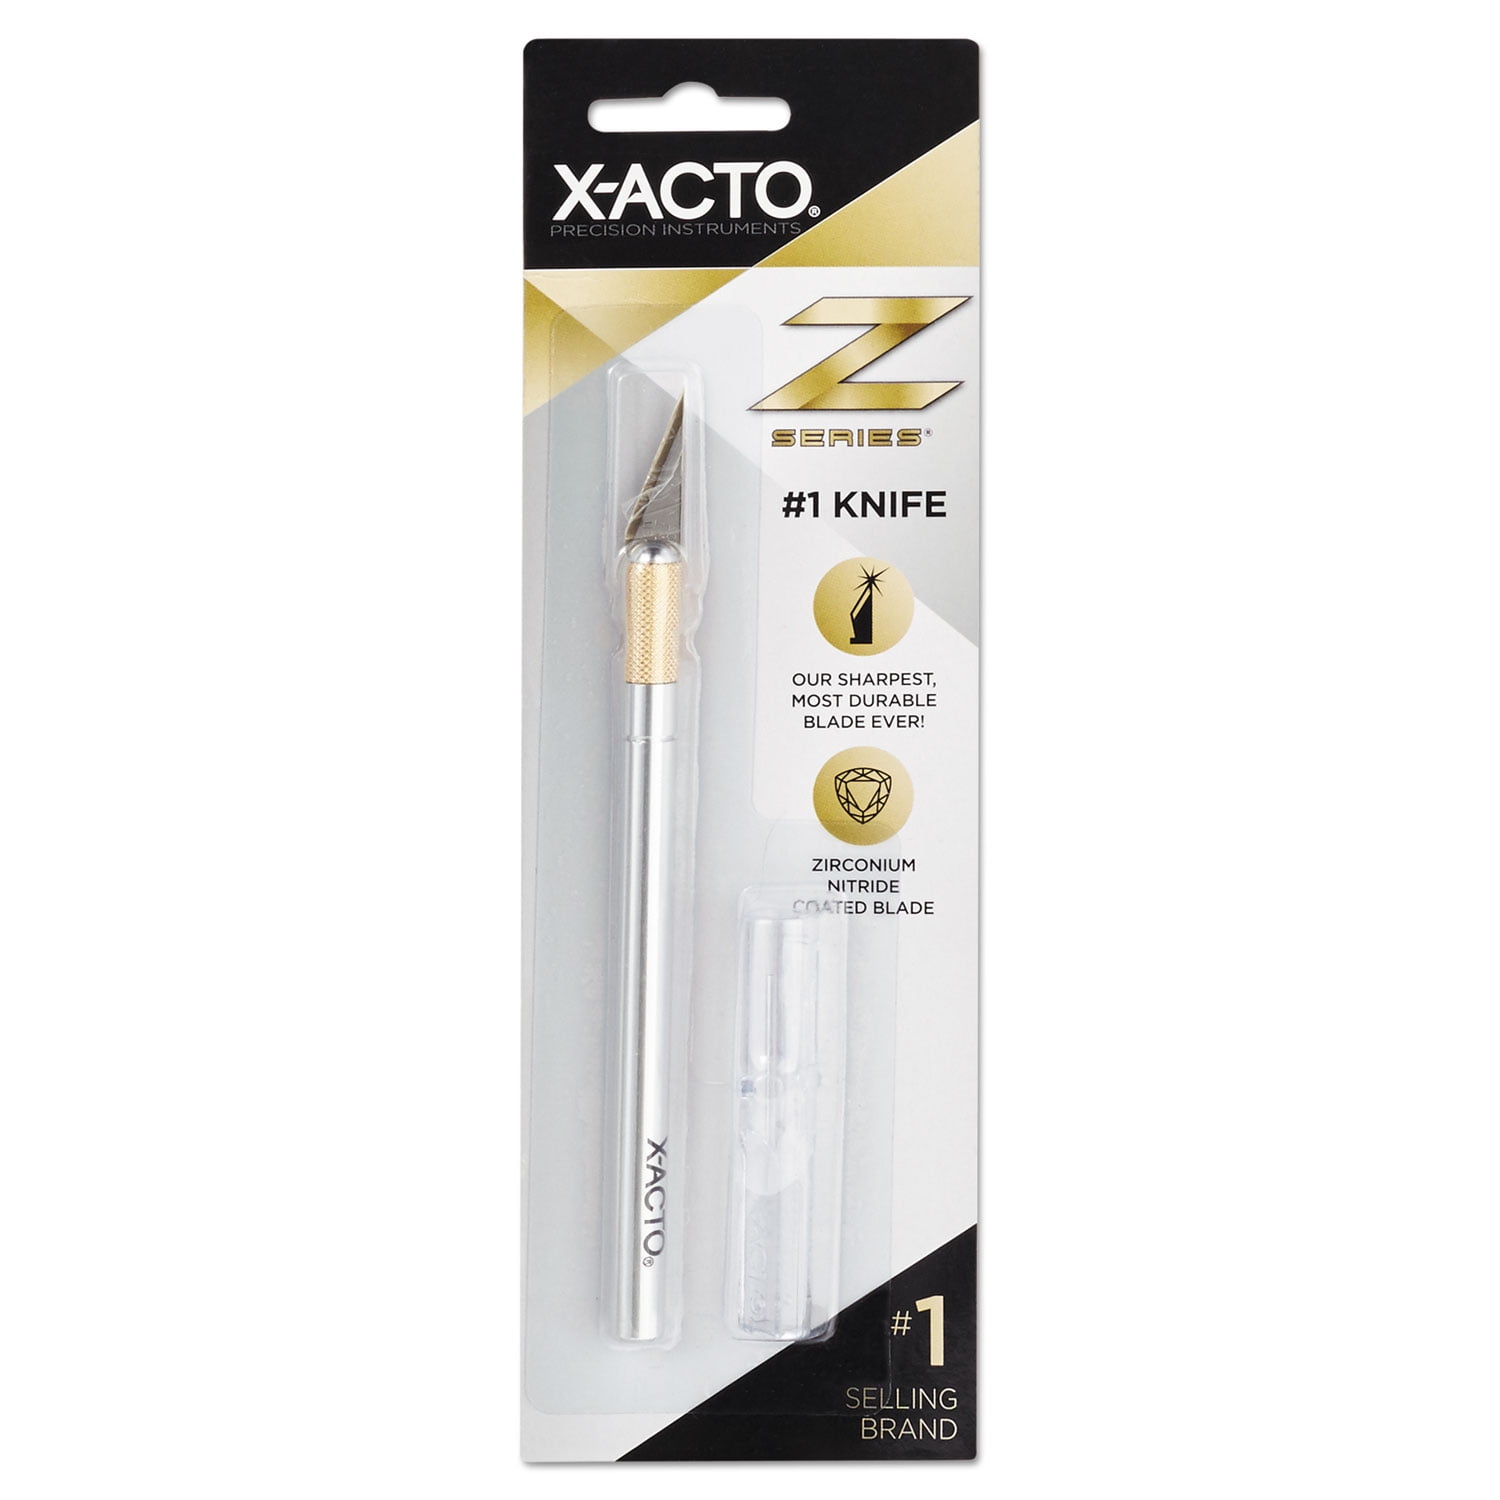 X-ACTO Z Series Light-Weight Precision Knife, No 11, 4-7/8 in L, Stainless  Steel Blade, Aluminum Handle, Silver, Gold Hue